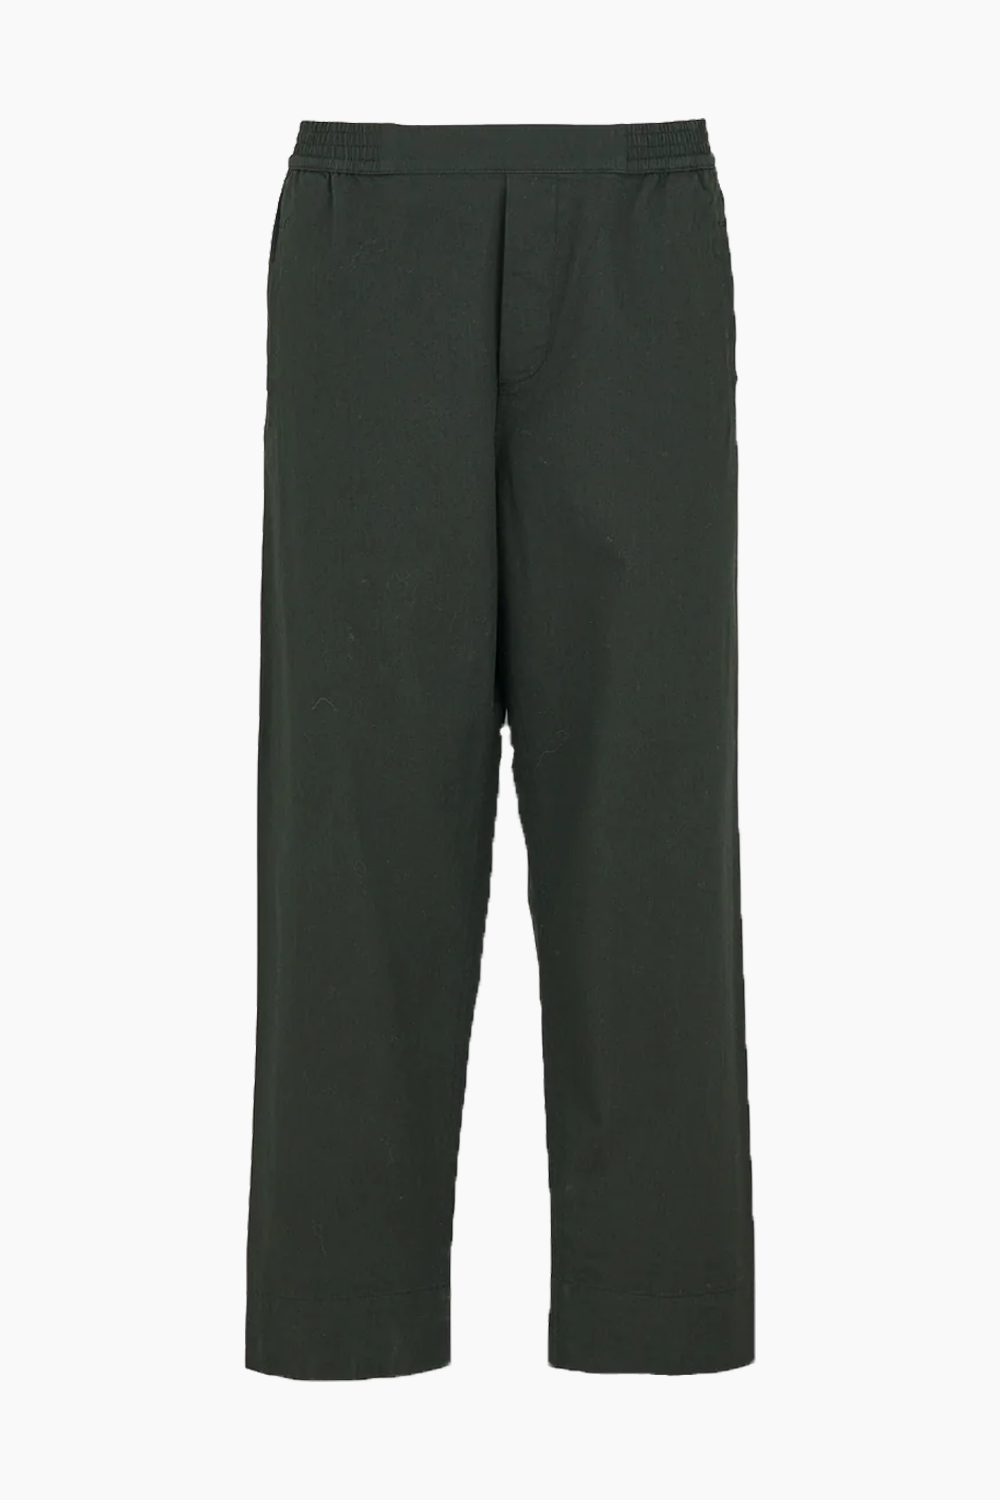 Coco Pant Twill - Virgin Oil - Aiayu